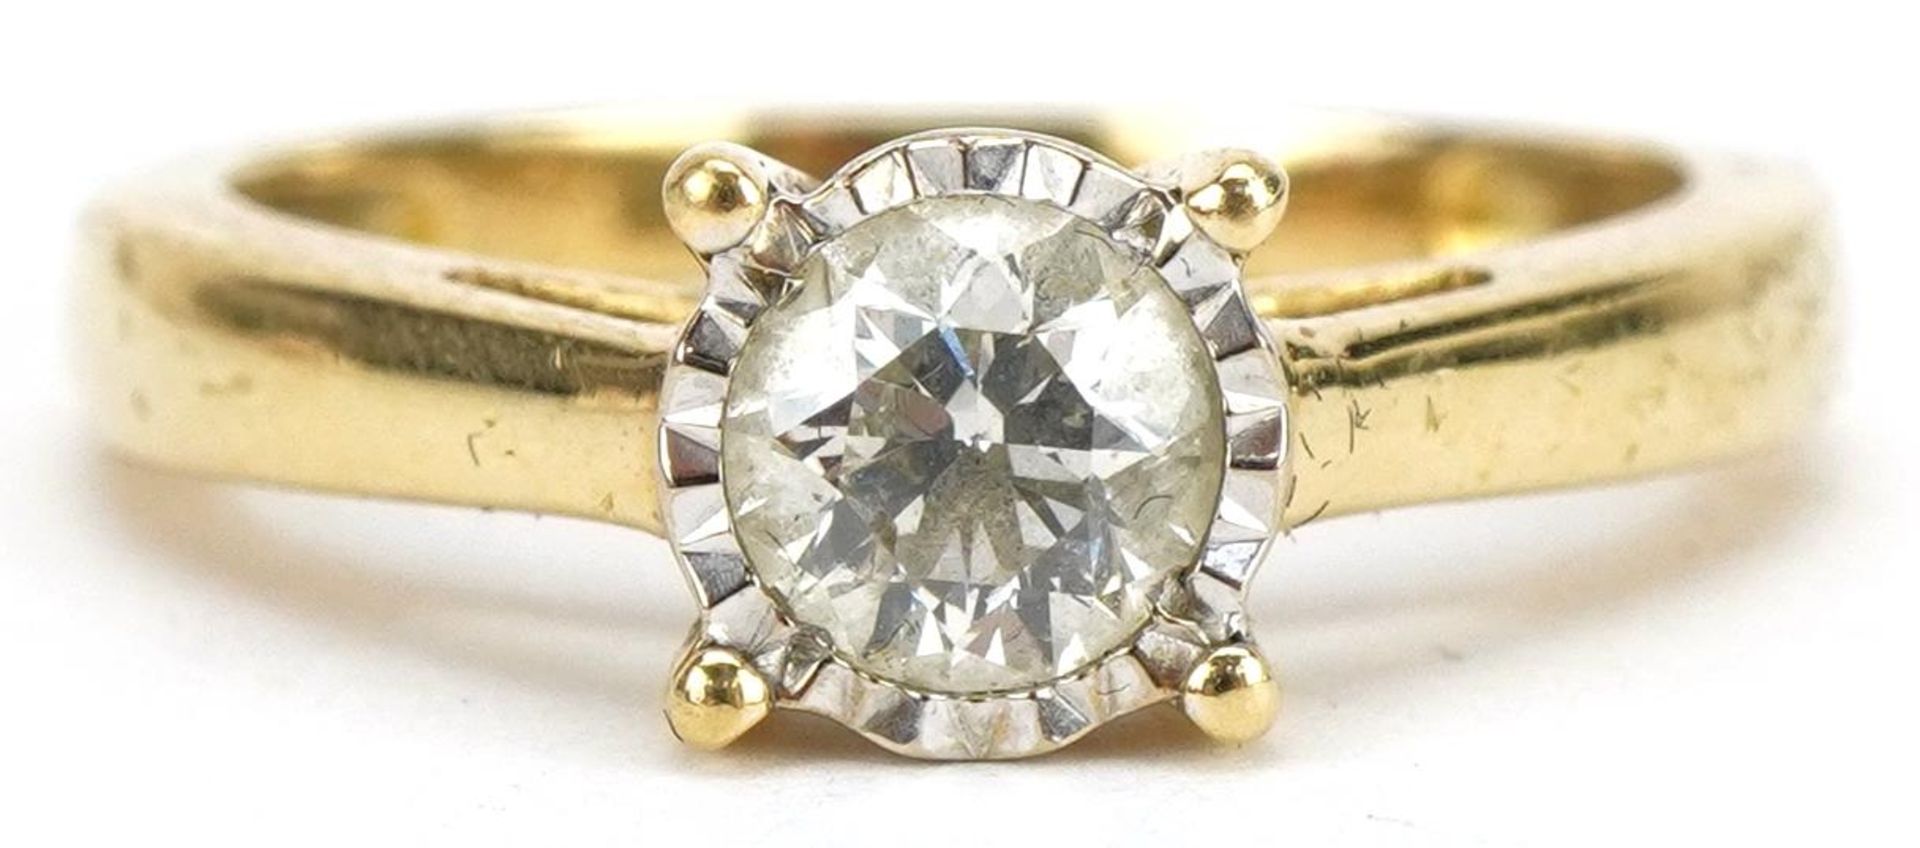 18ct gold diamond solitaire ring, the diamond approximately 0.55 carat, size K, 3.2g : For further